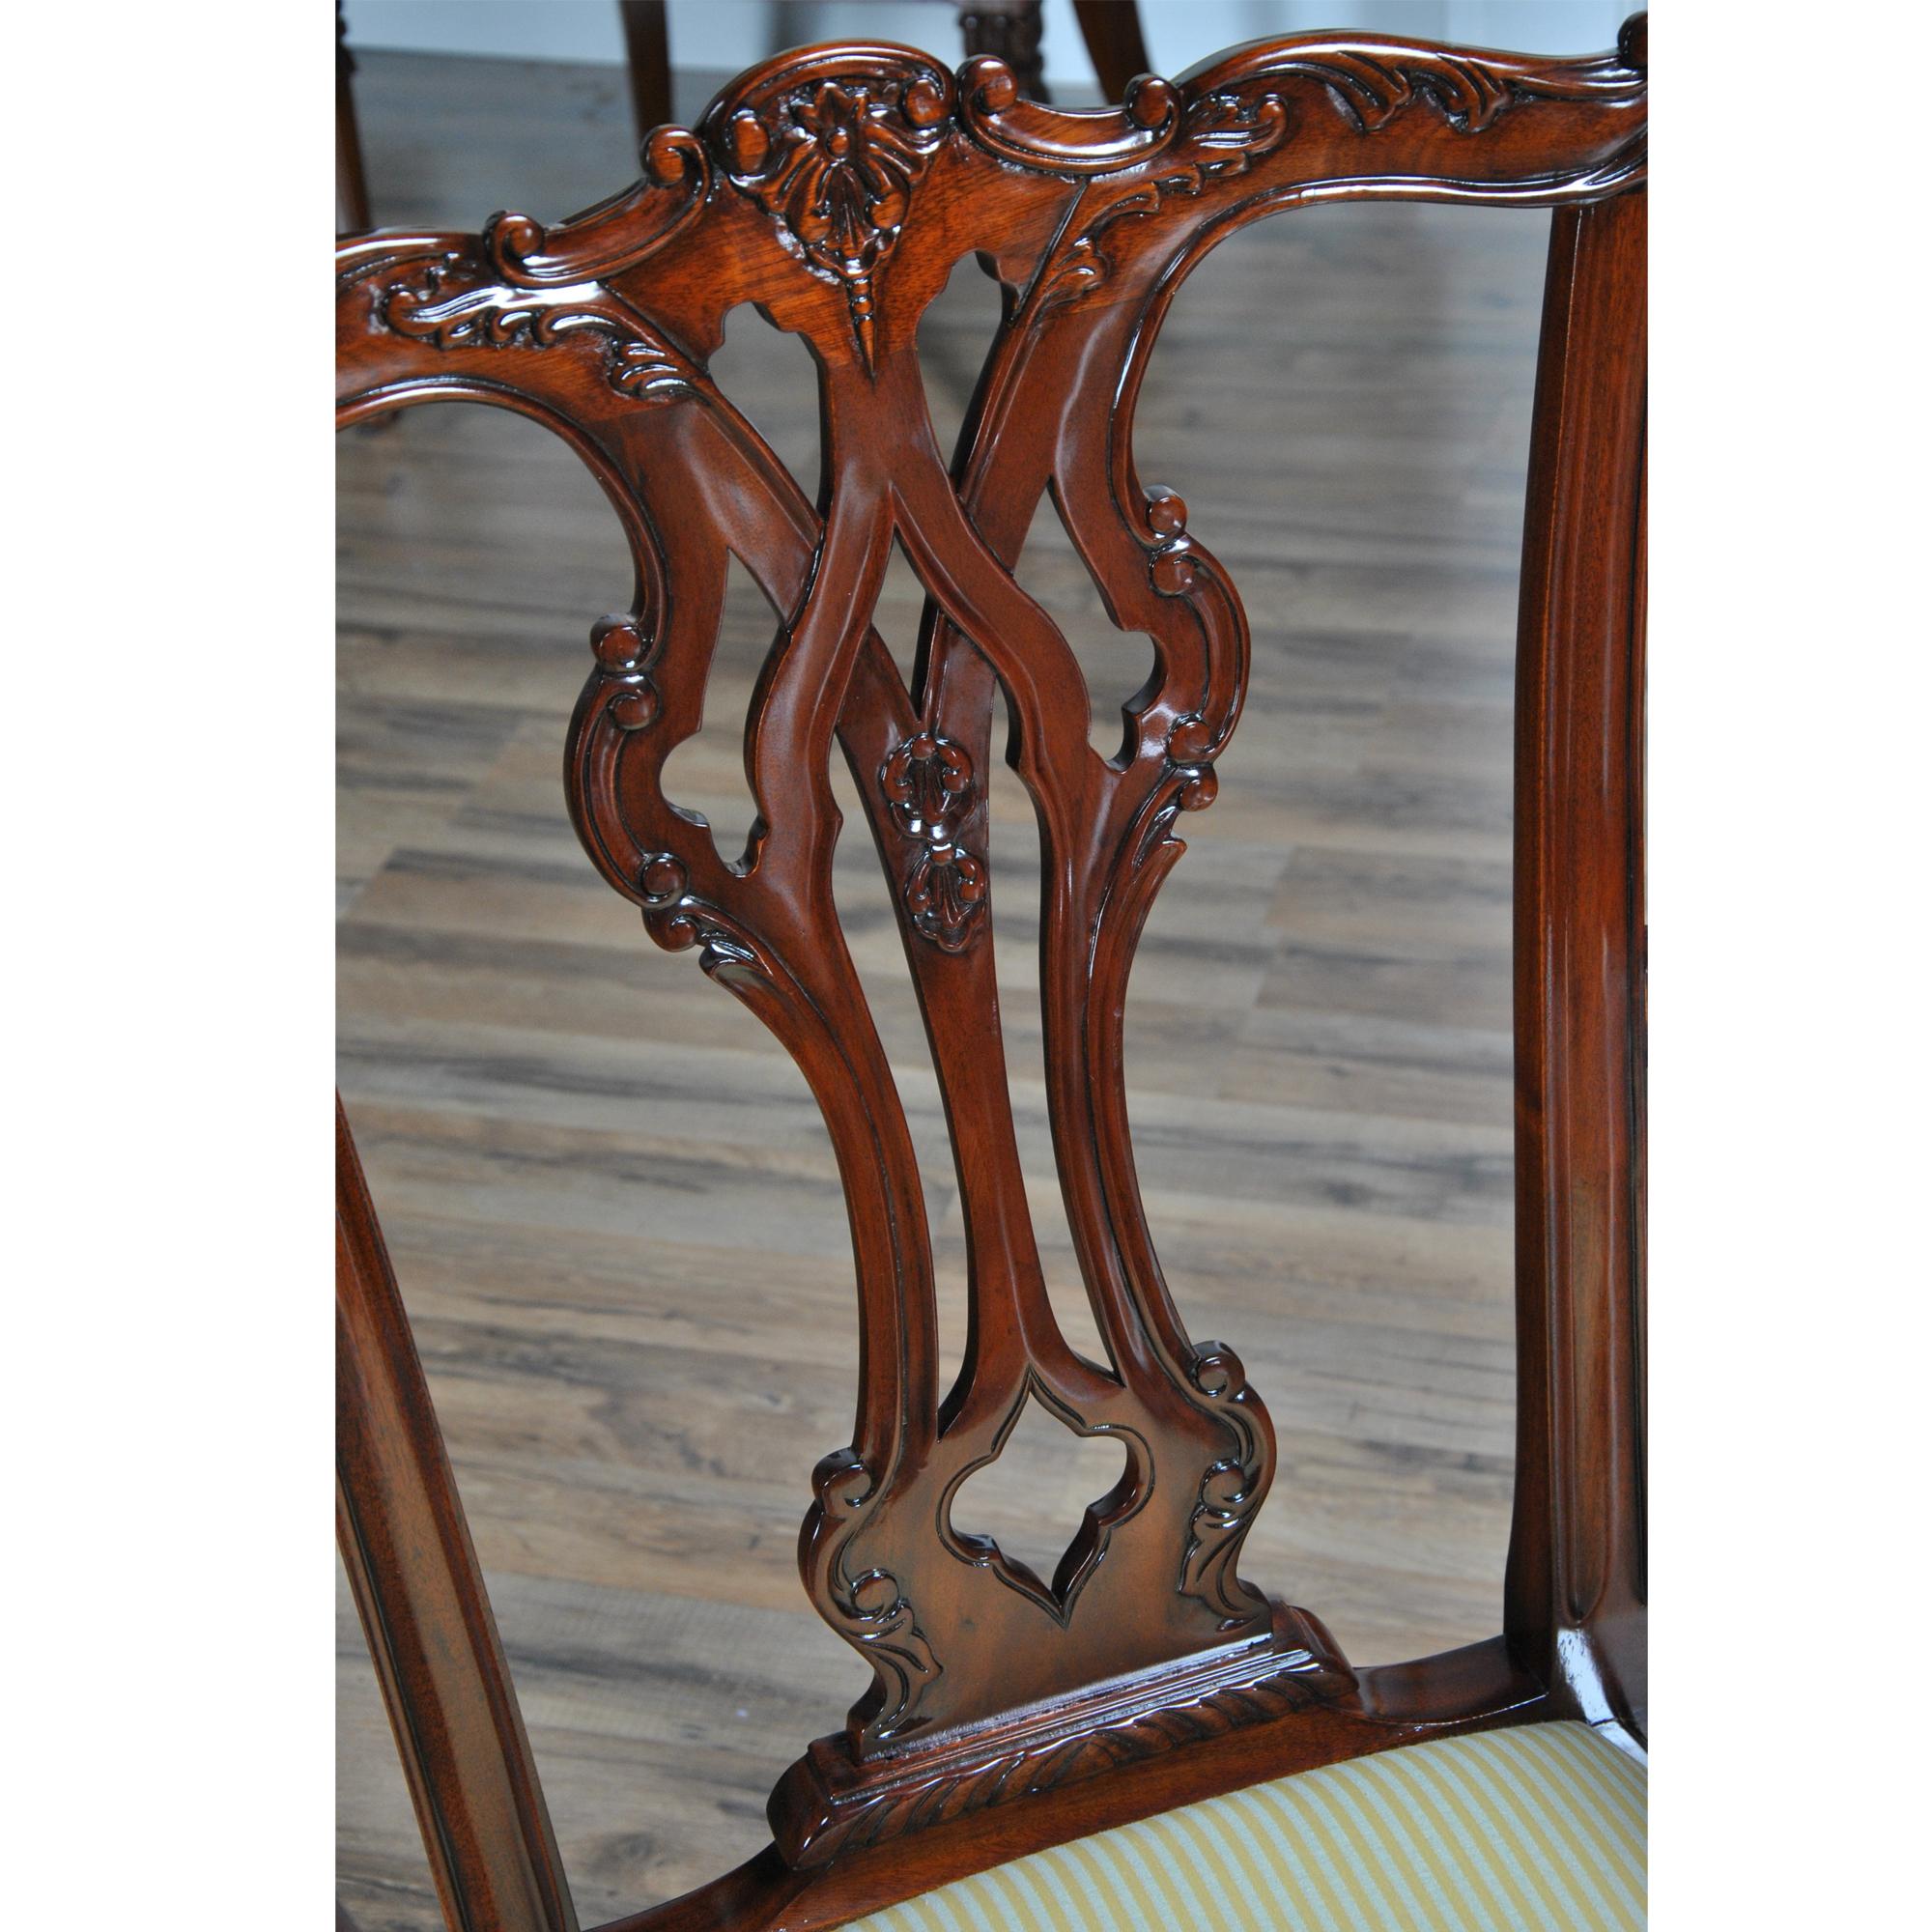 A luxurious set of 10 Essex Chippendale Chairs, the set consisting of 2 arm chairs and 8 side chairs. Each chair features a highly carved and intricately serpentine crest rail and a carved and pierced back splat. The arm chair has scrolled arms at a